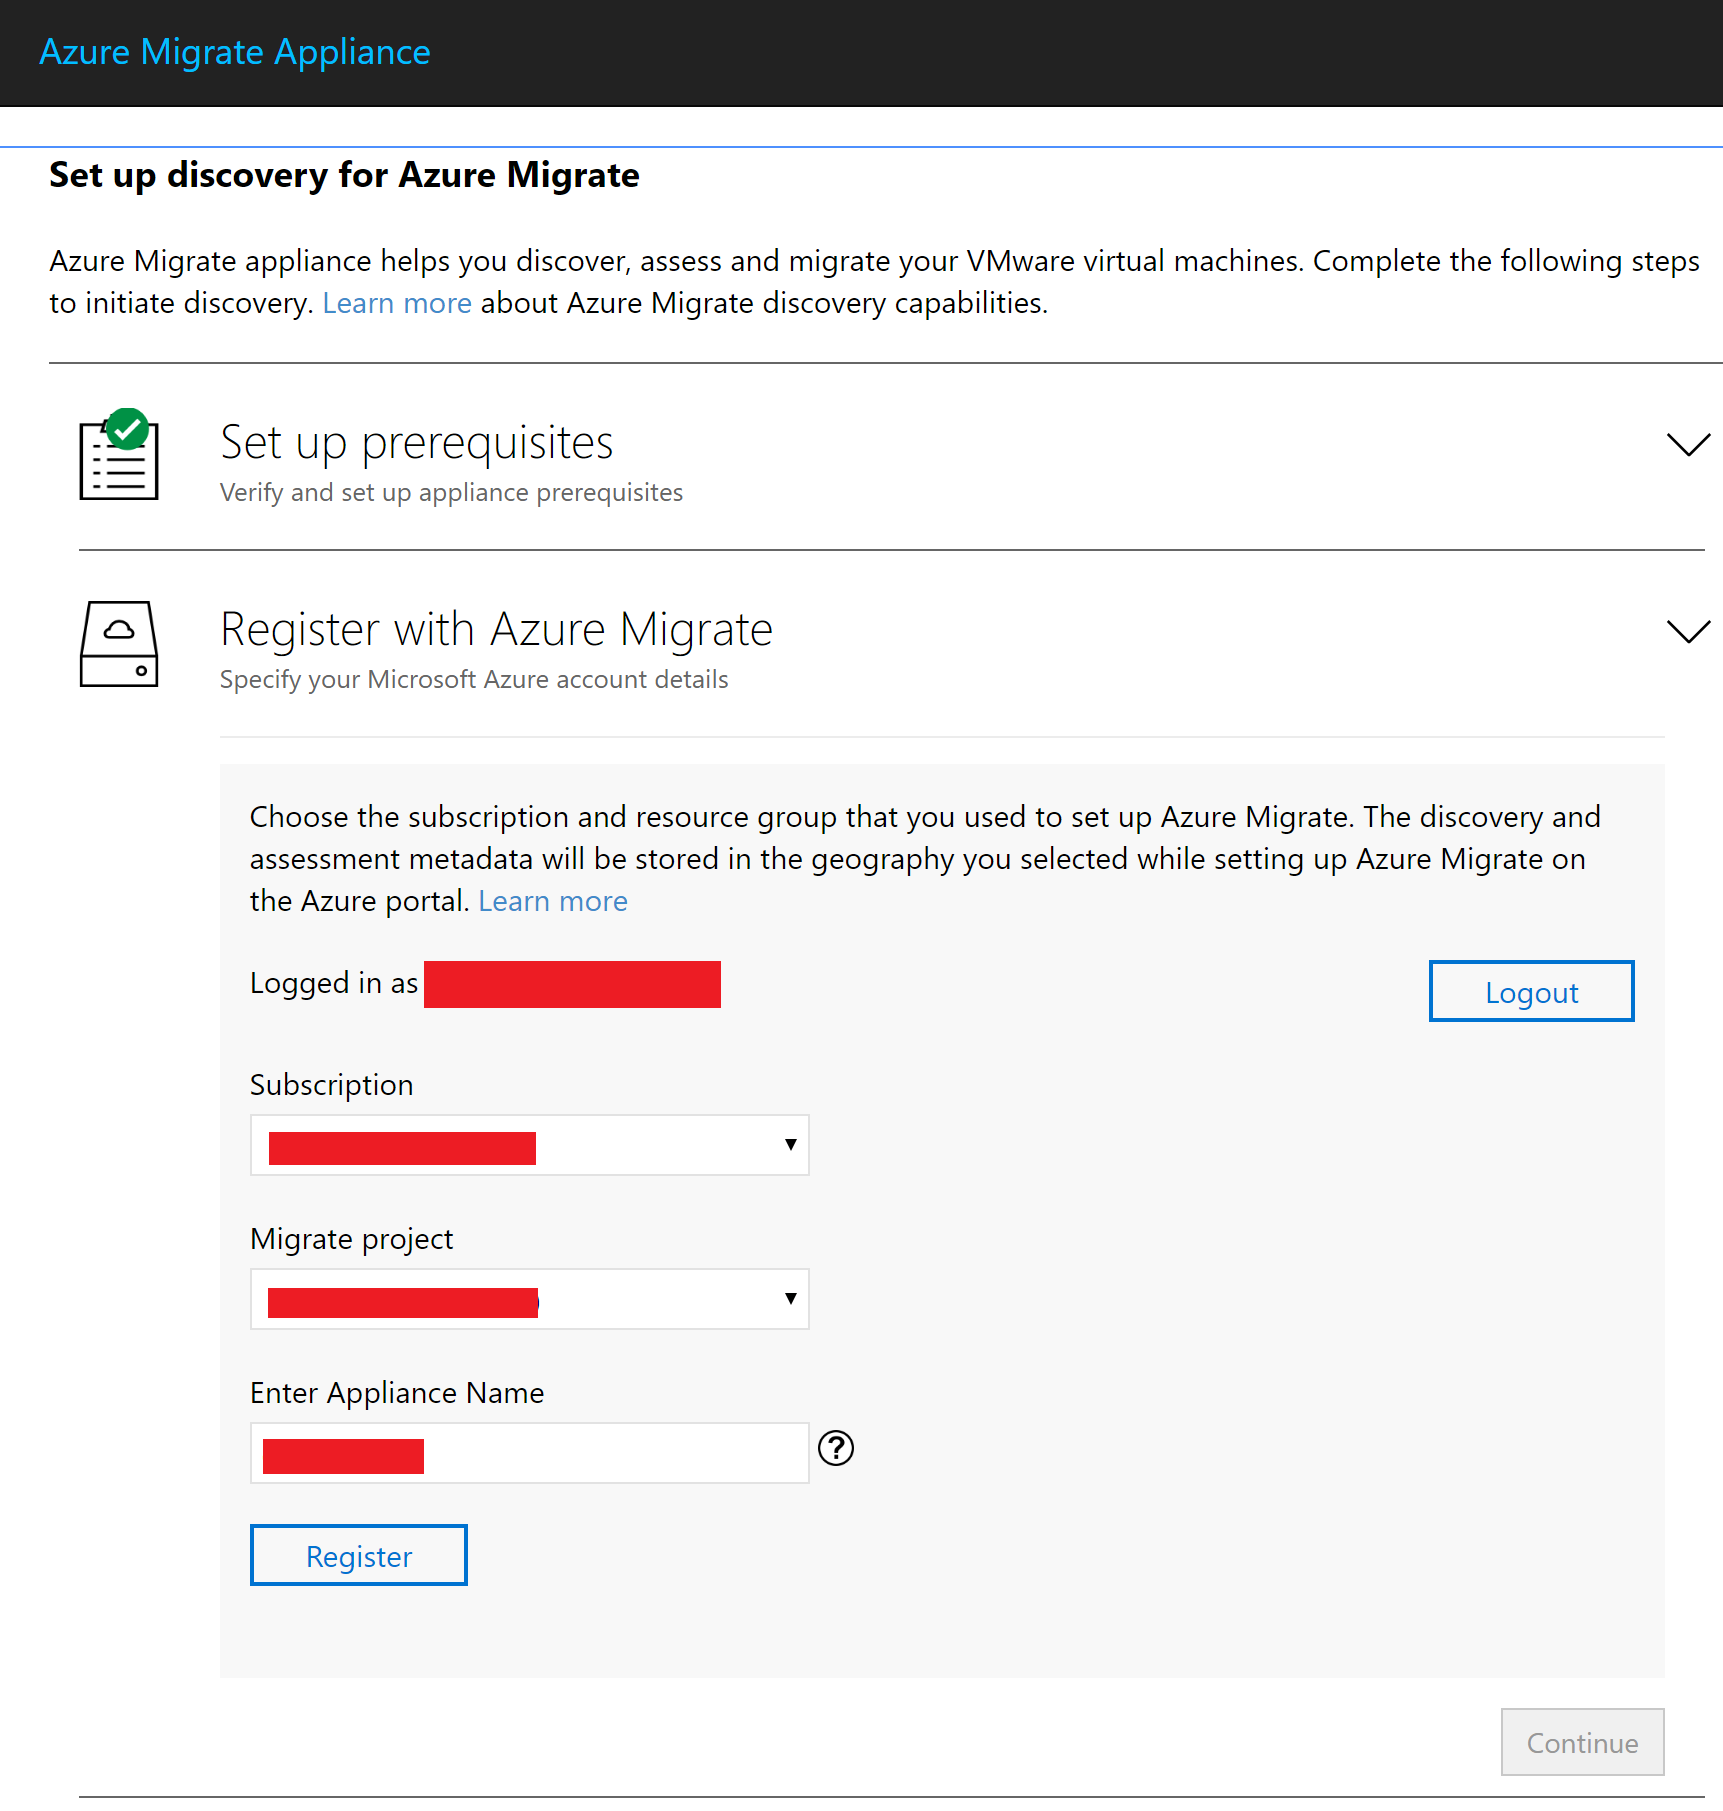 Screenshot of the section for setting up discovery for Azure Migrate.